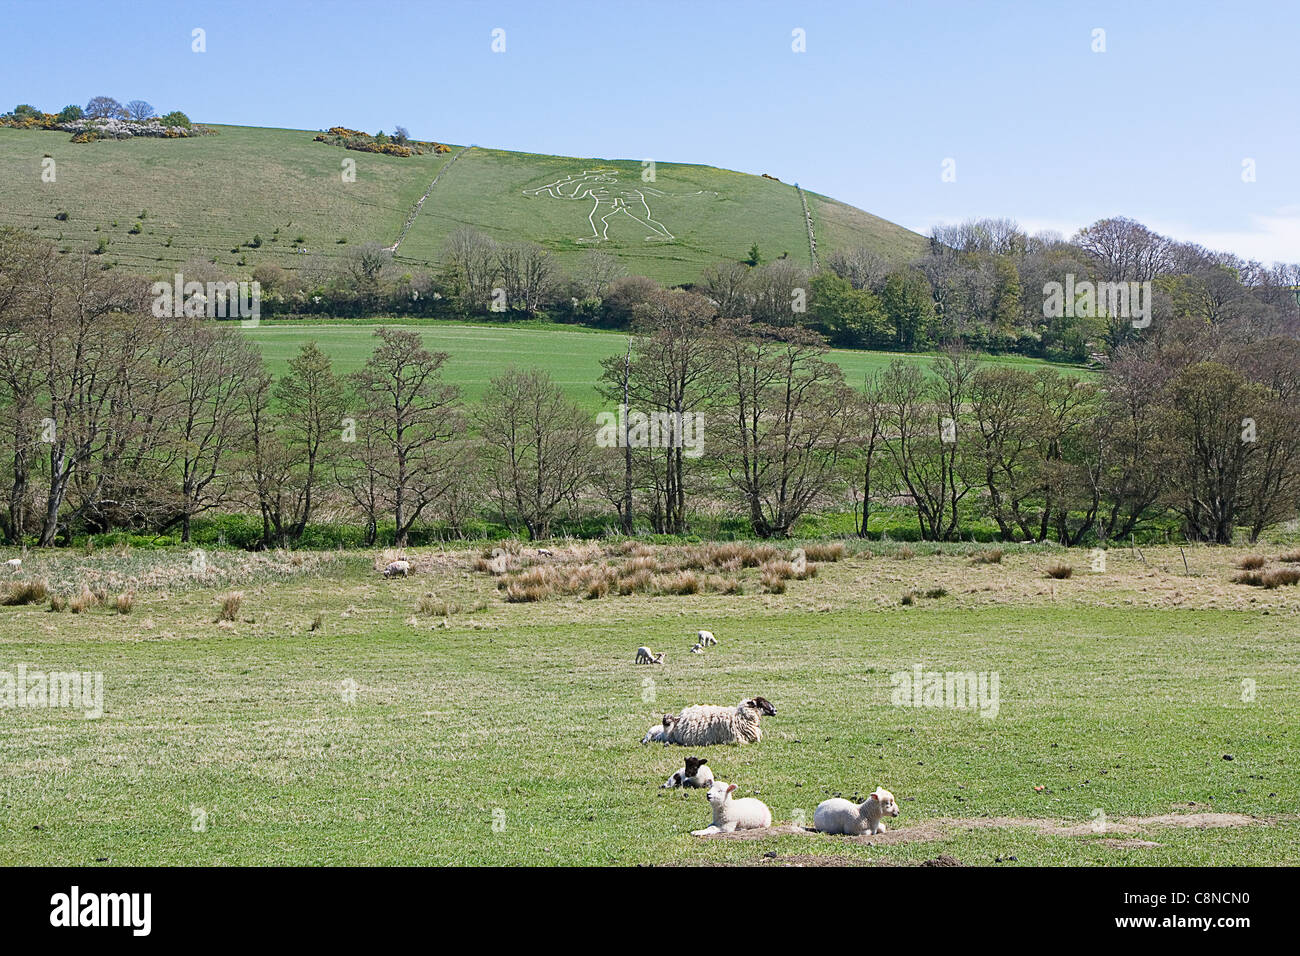 Great Britain, England, Dorset, Cerne Abbas, View of the Cerne Abbas Giant (chalk carving on hill) with sheep in the foreground Stock Photo